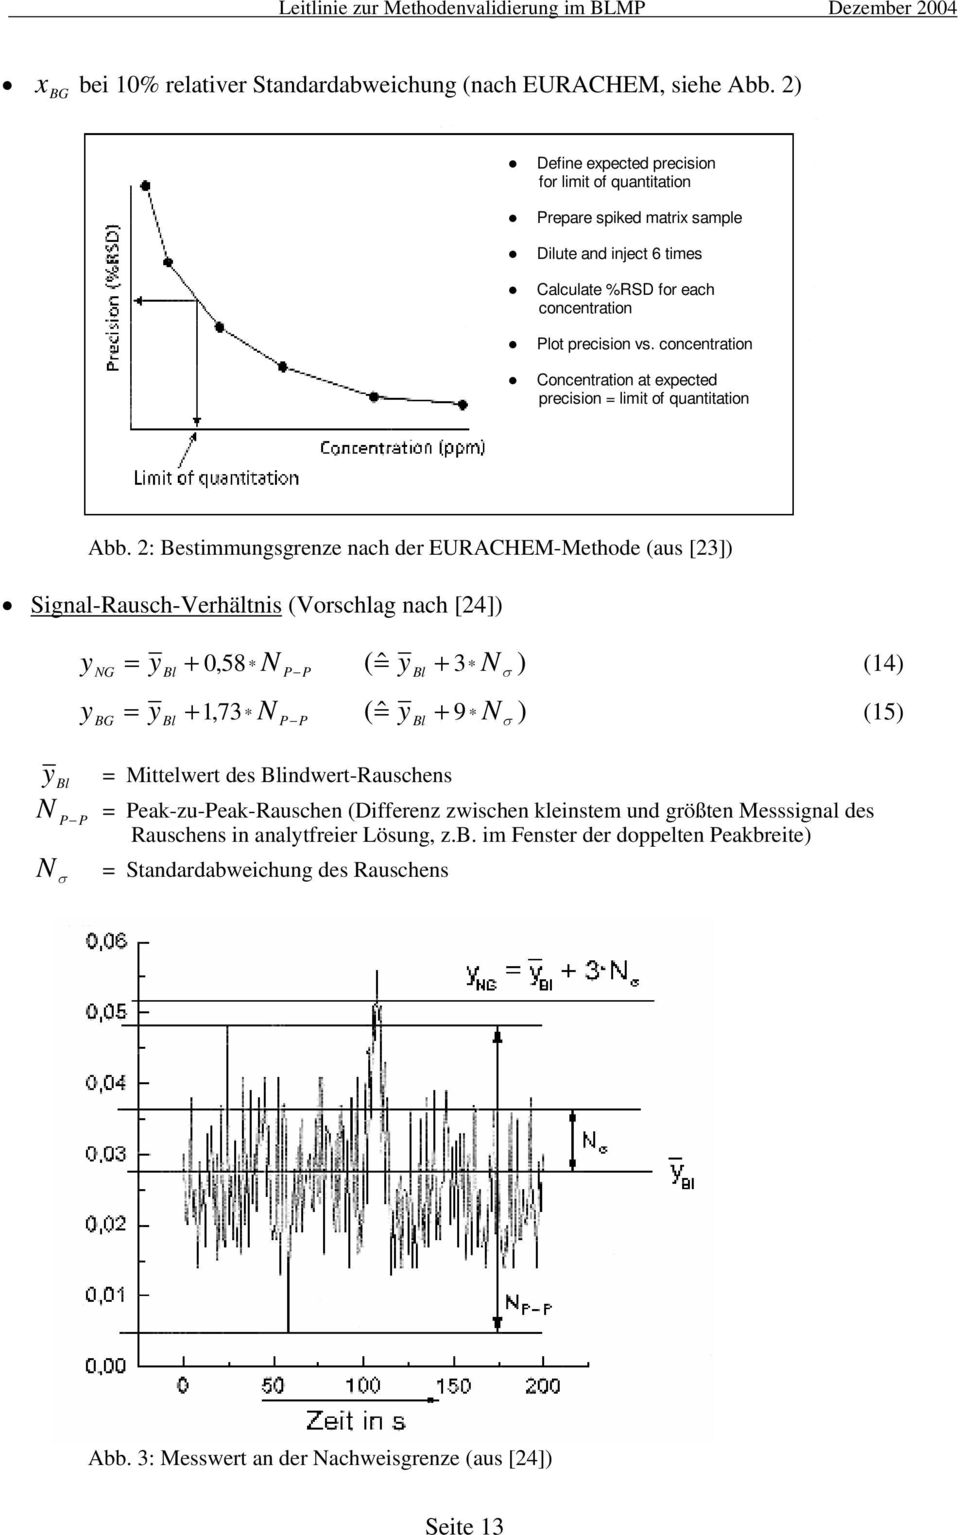 concentration Concentration at expected precision = limit of quantitation Abb.